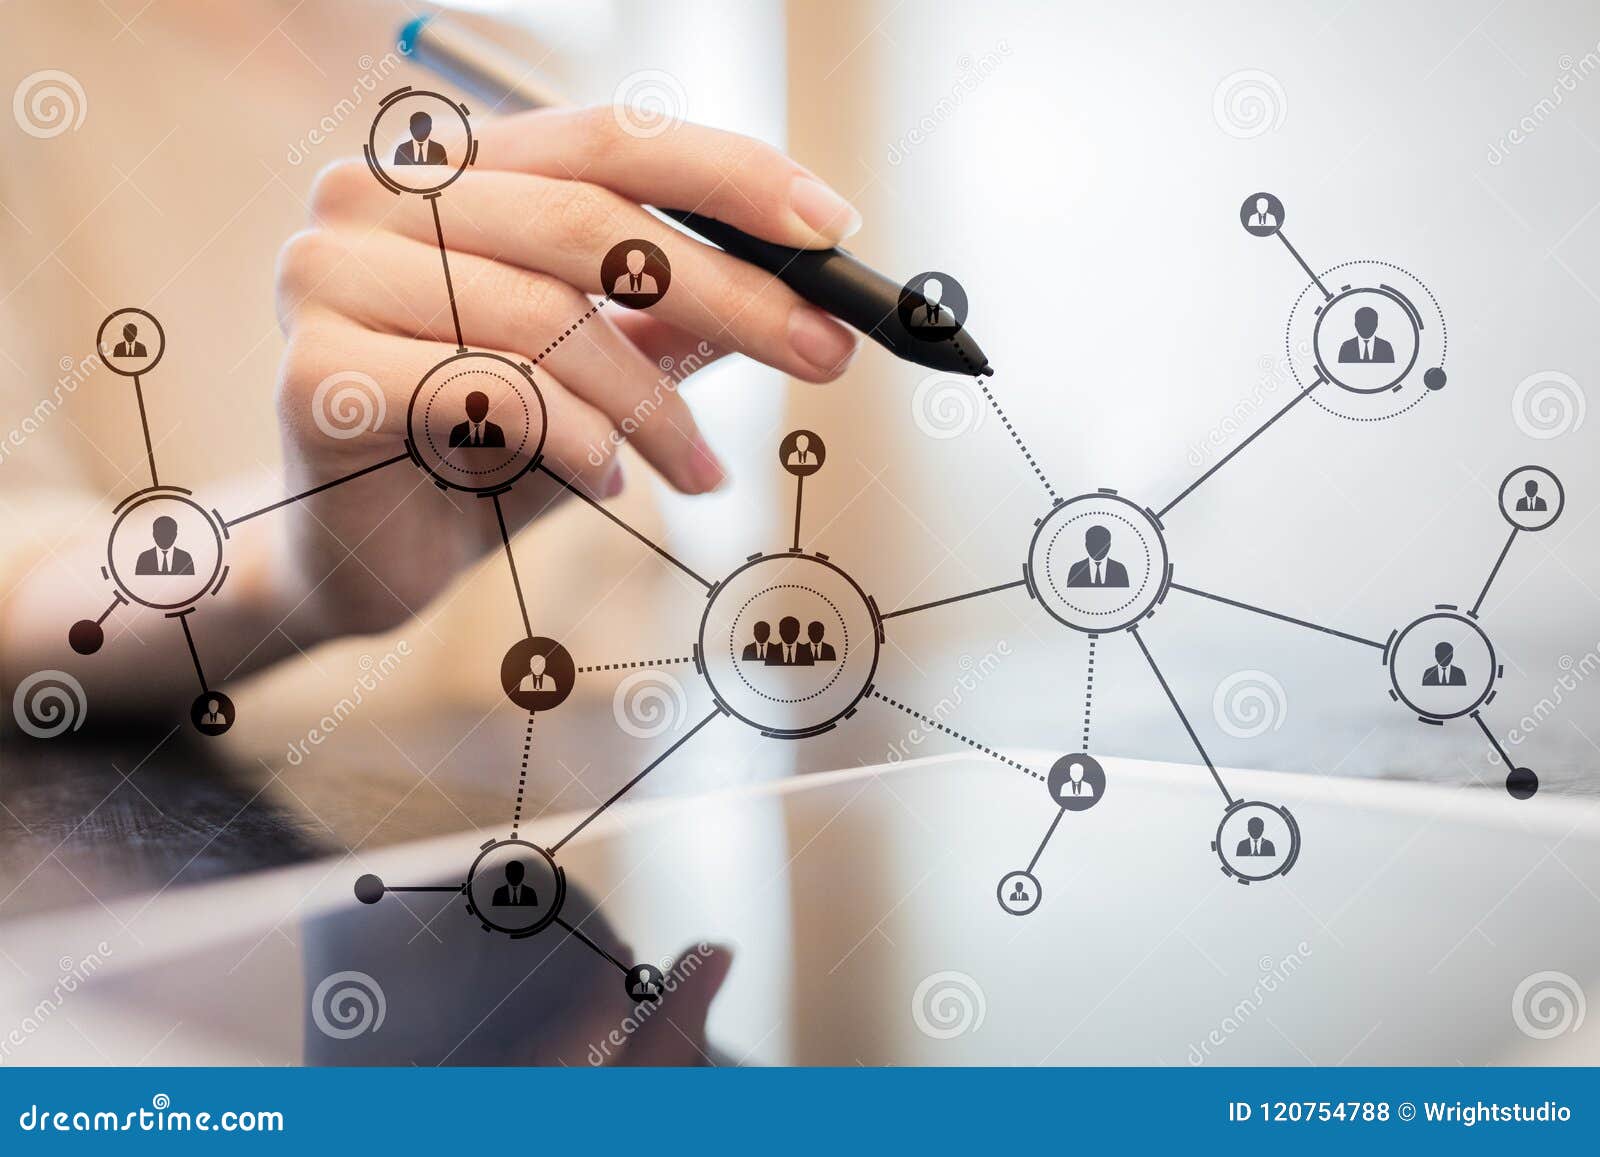 organisation structure. people`s social network. business and technology concept.